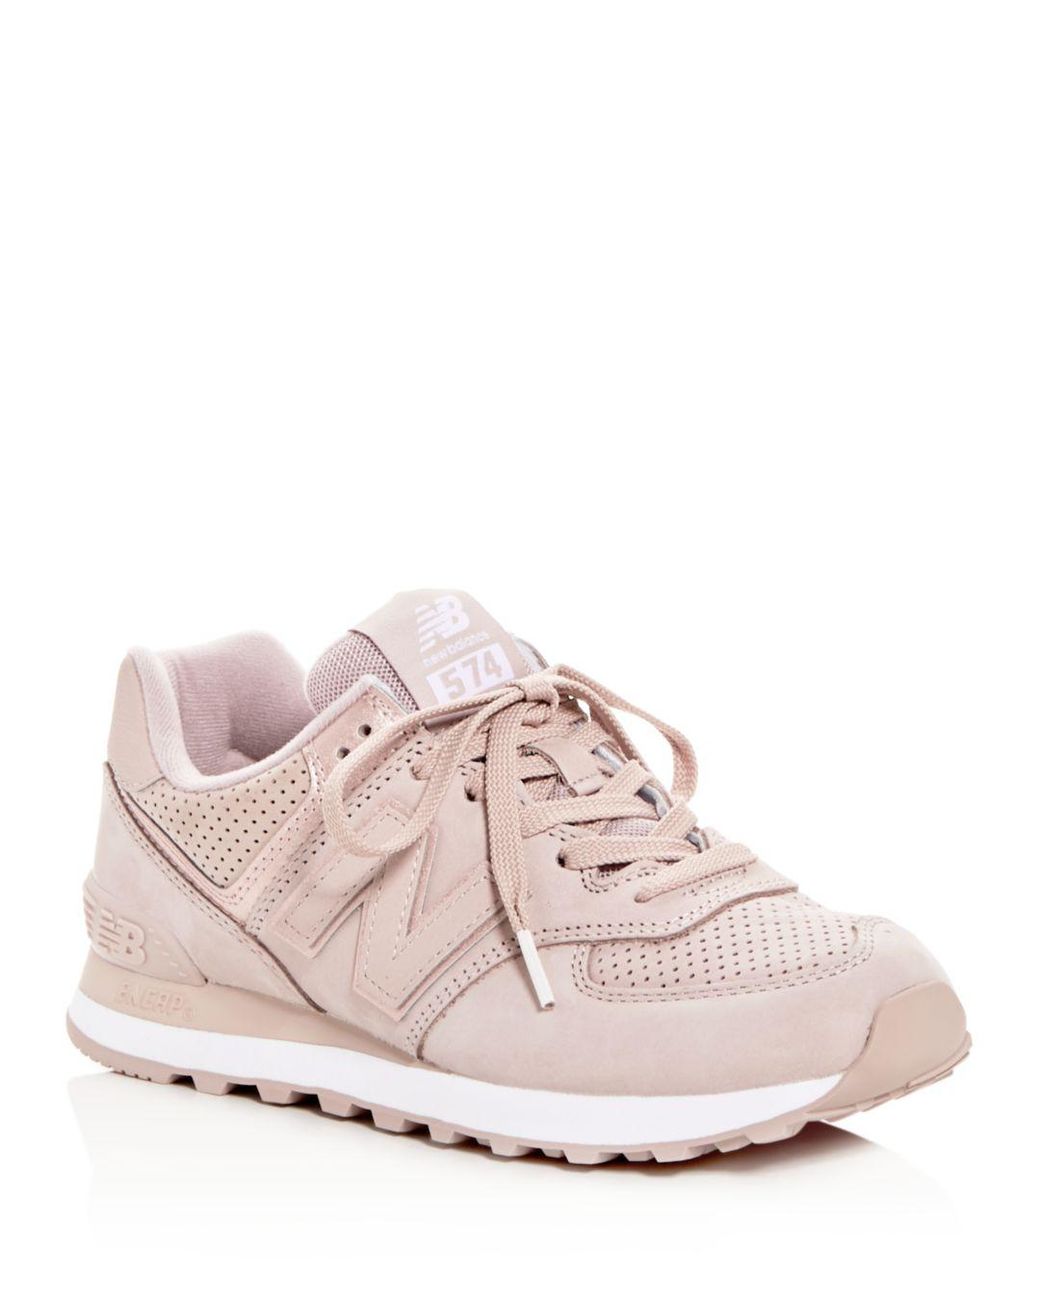 New Balance Women's 574 Nubuck Leather Lace Up Sneakers in Pink | Lyst